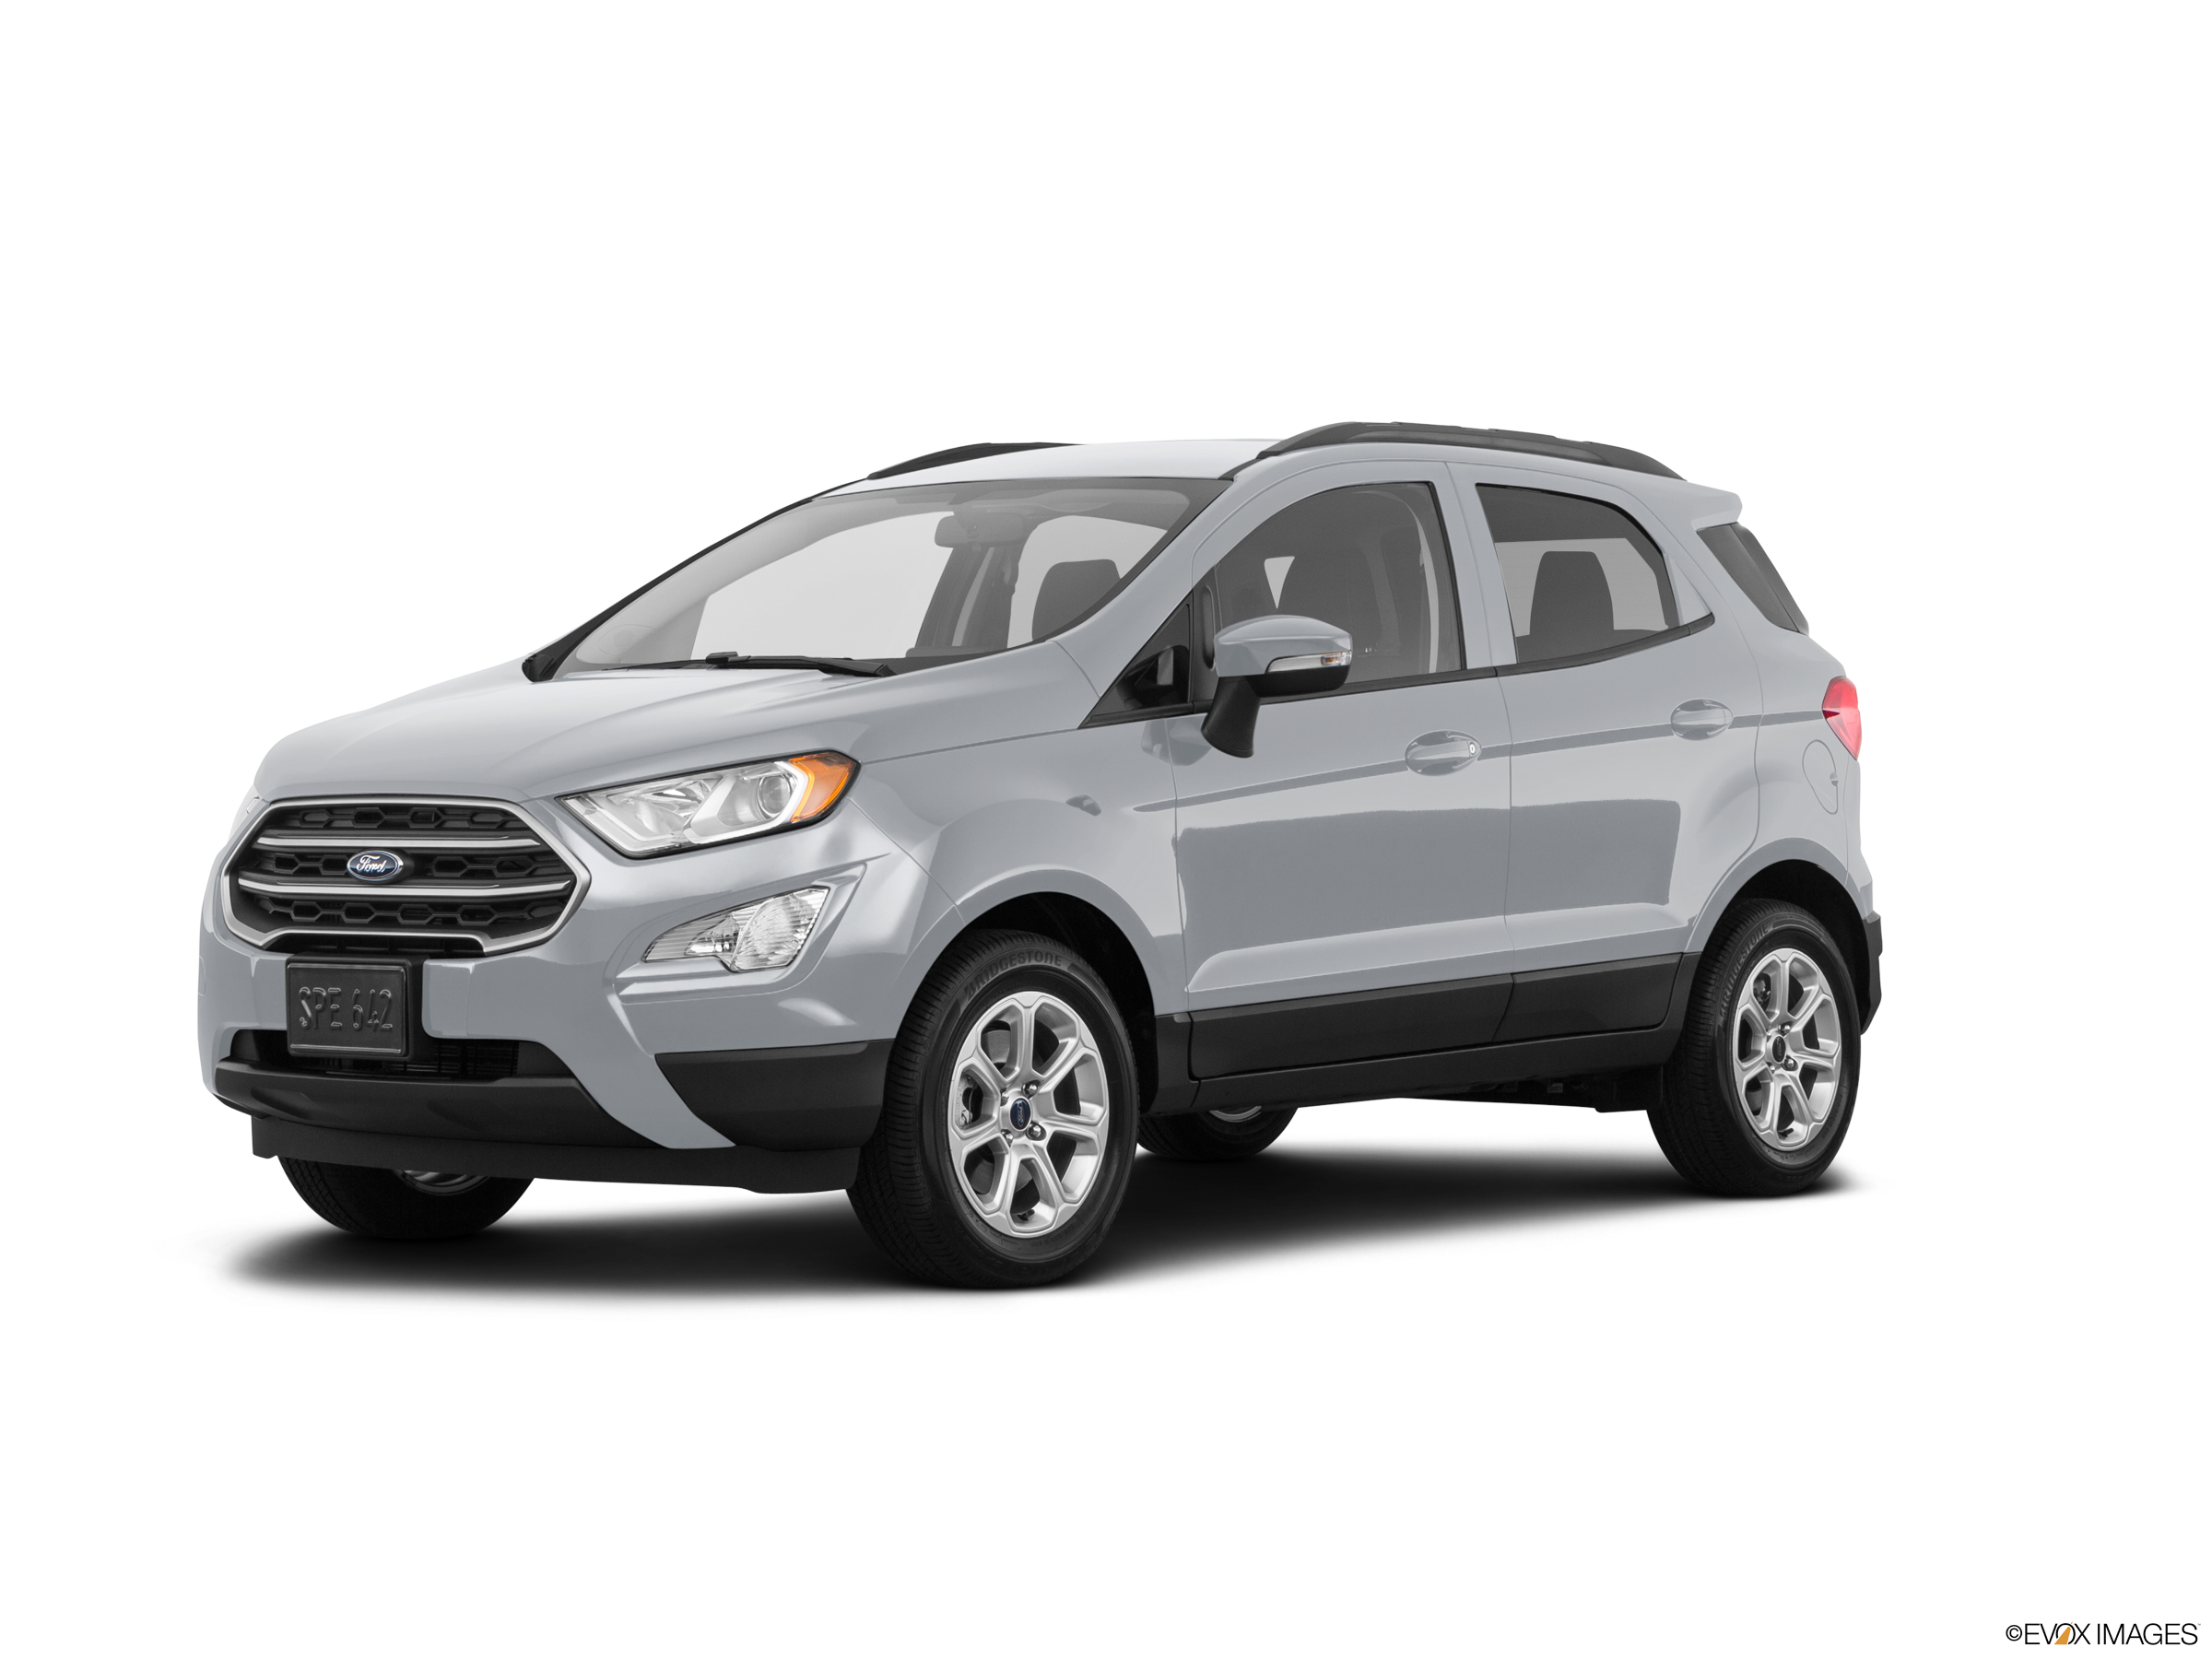 https://file.kelleybluebookimages.com/kbb/base/evox/CP/12570/2018-Ford-EcoSport-front_12570_032_2400x1800_TY.png